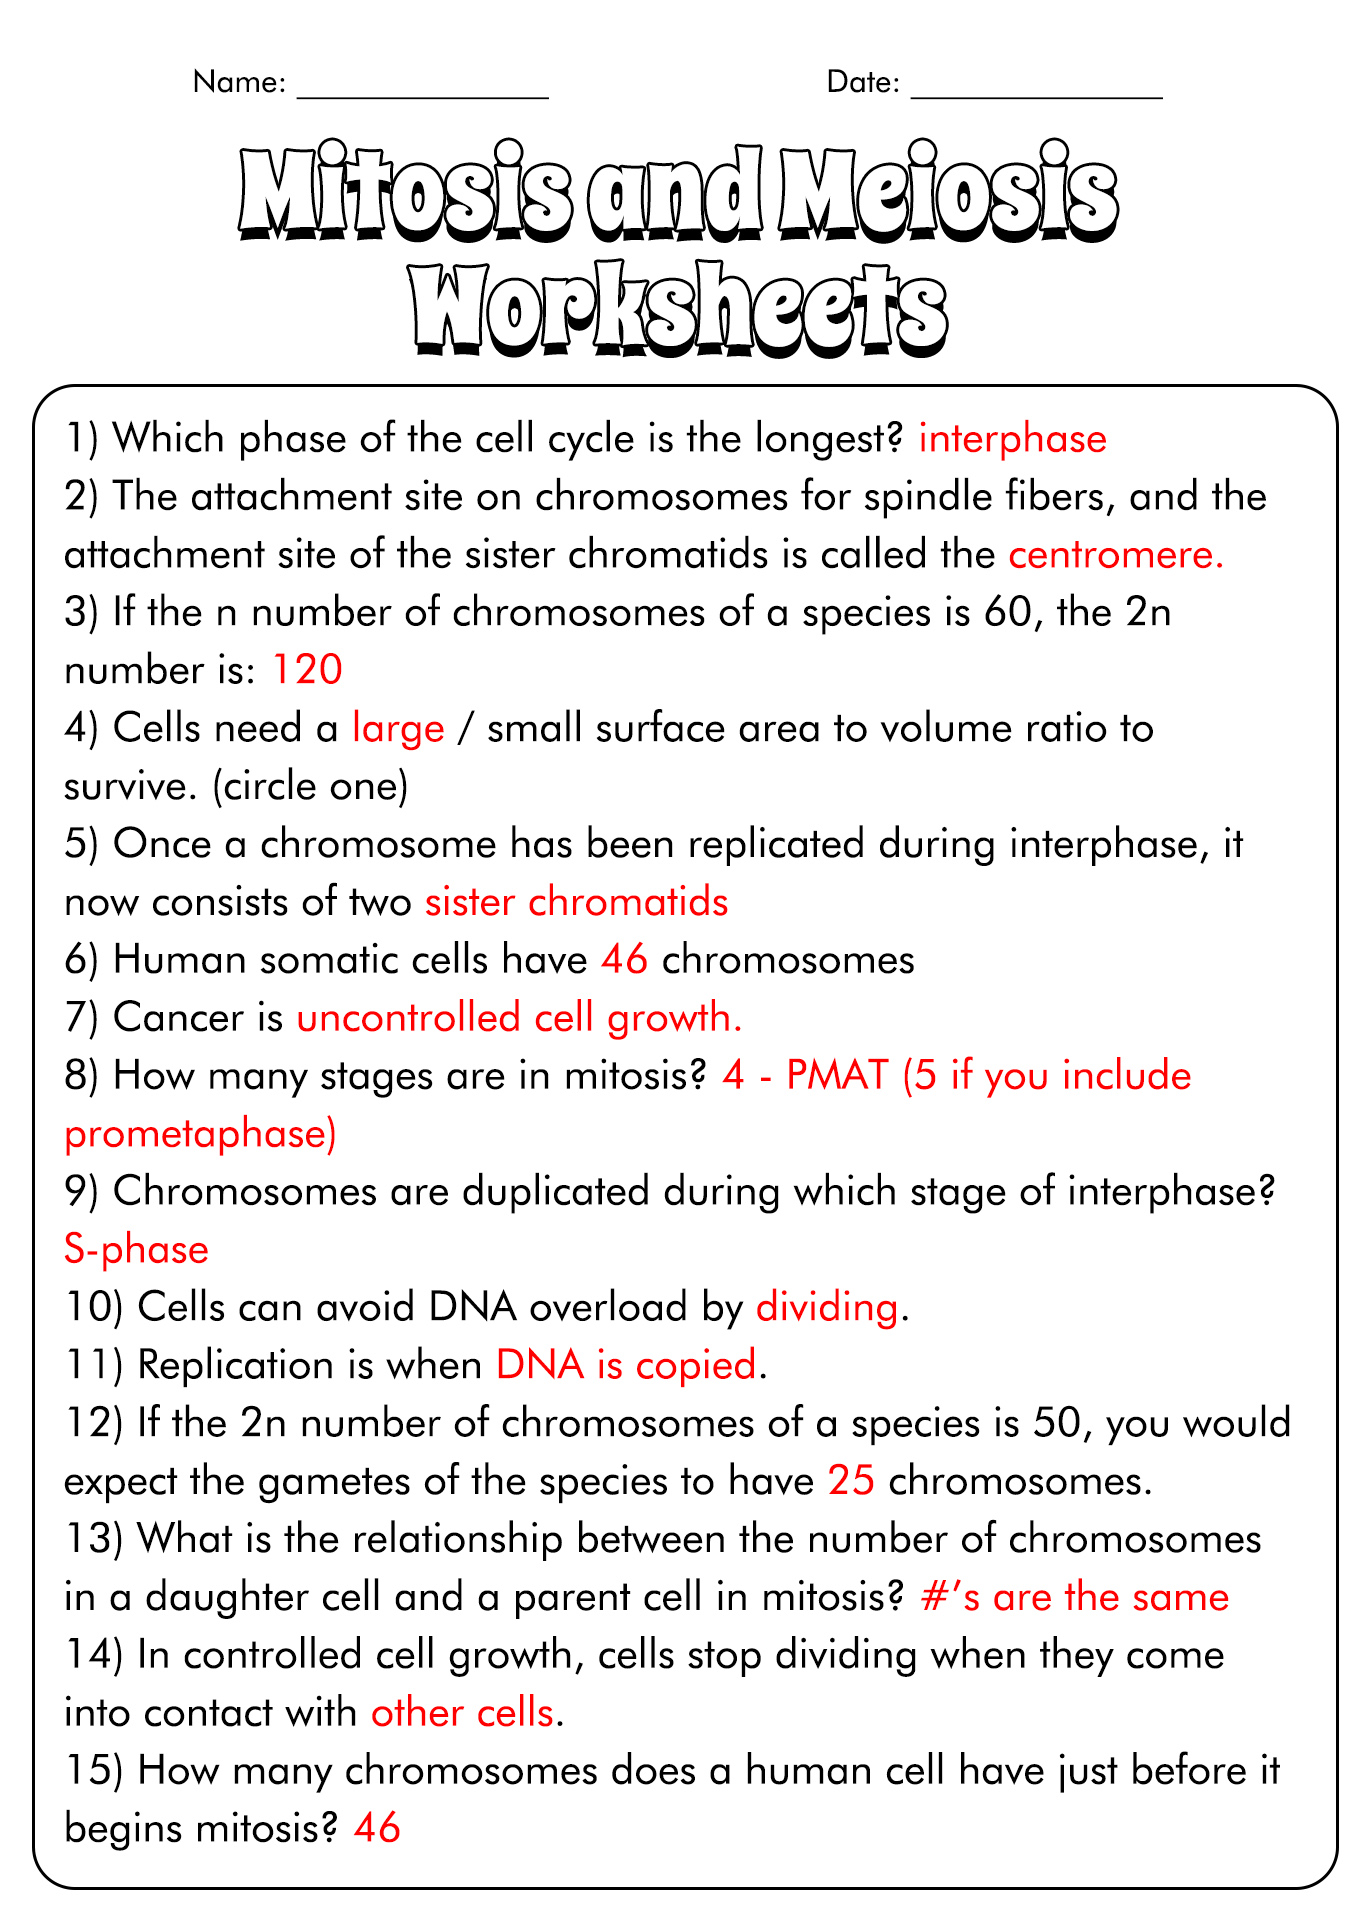 Mitosis and Meiosis Worksheet Answer Key